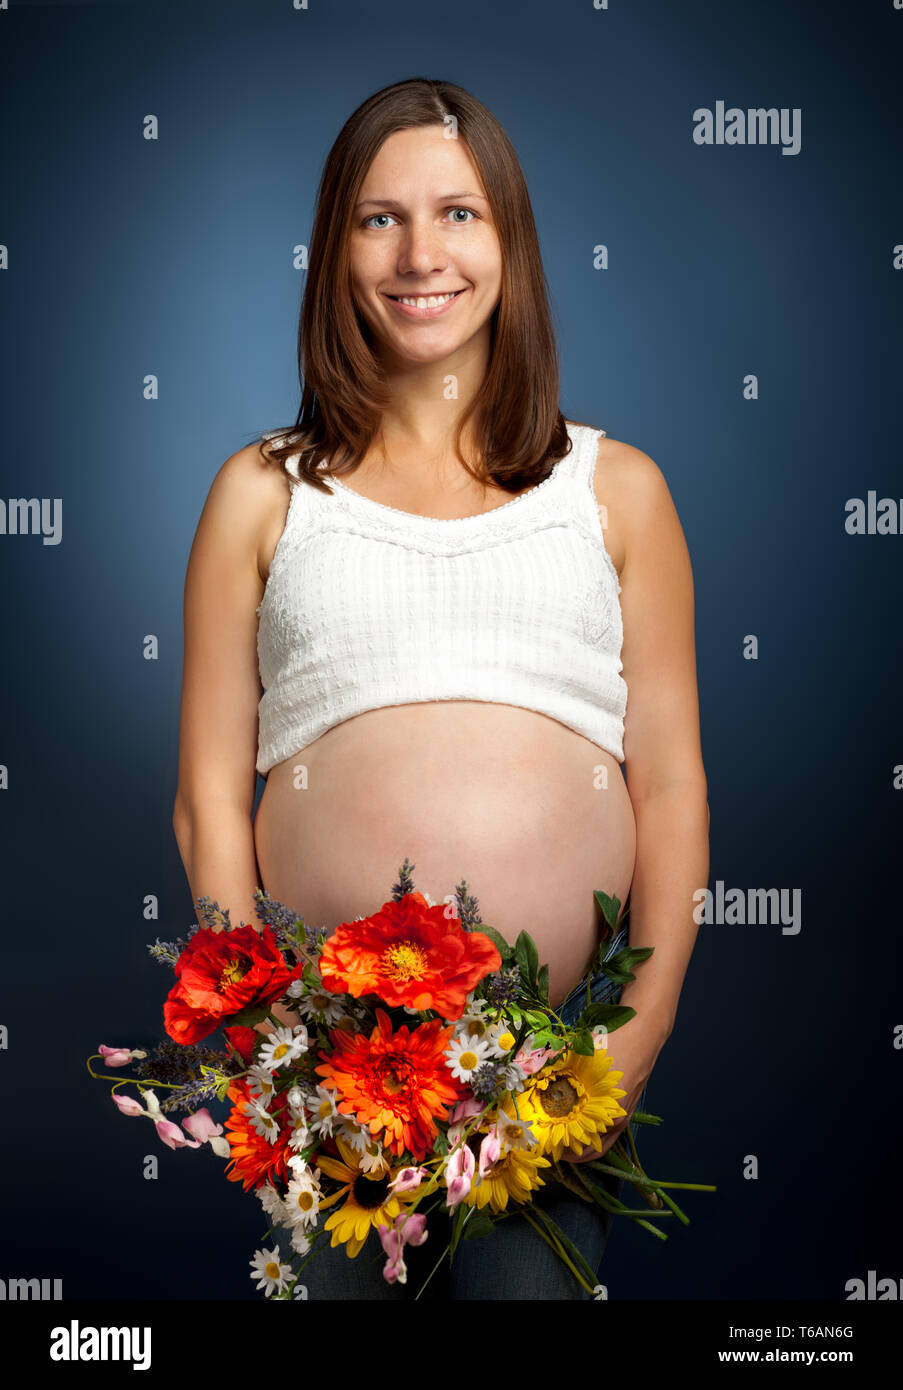 Beautiful young pregnant woman Stock Photo